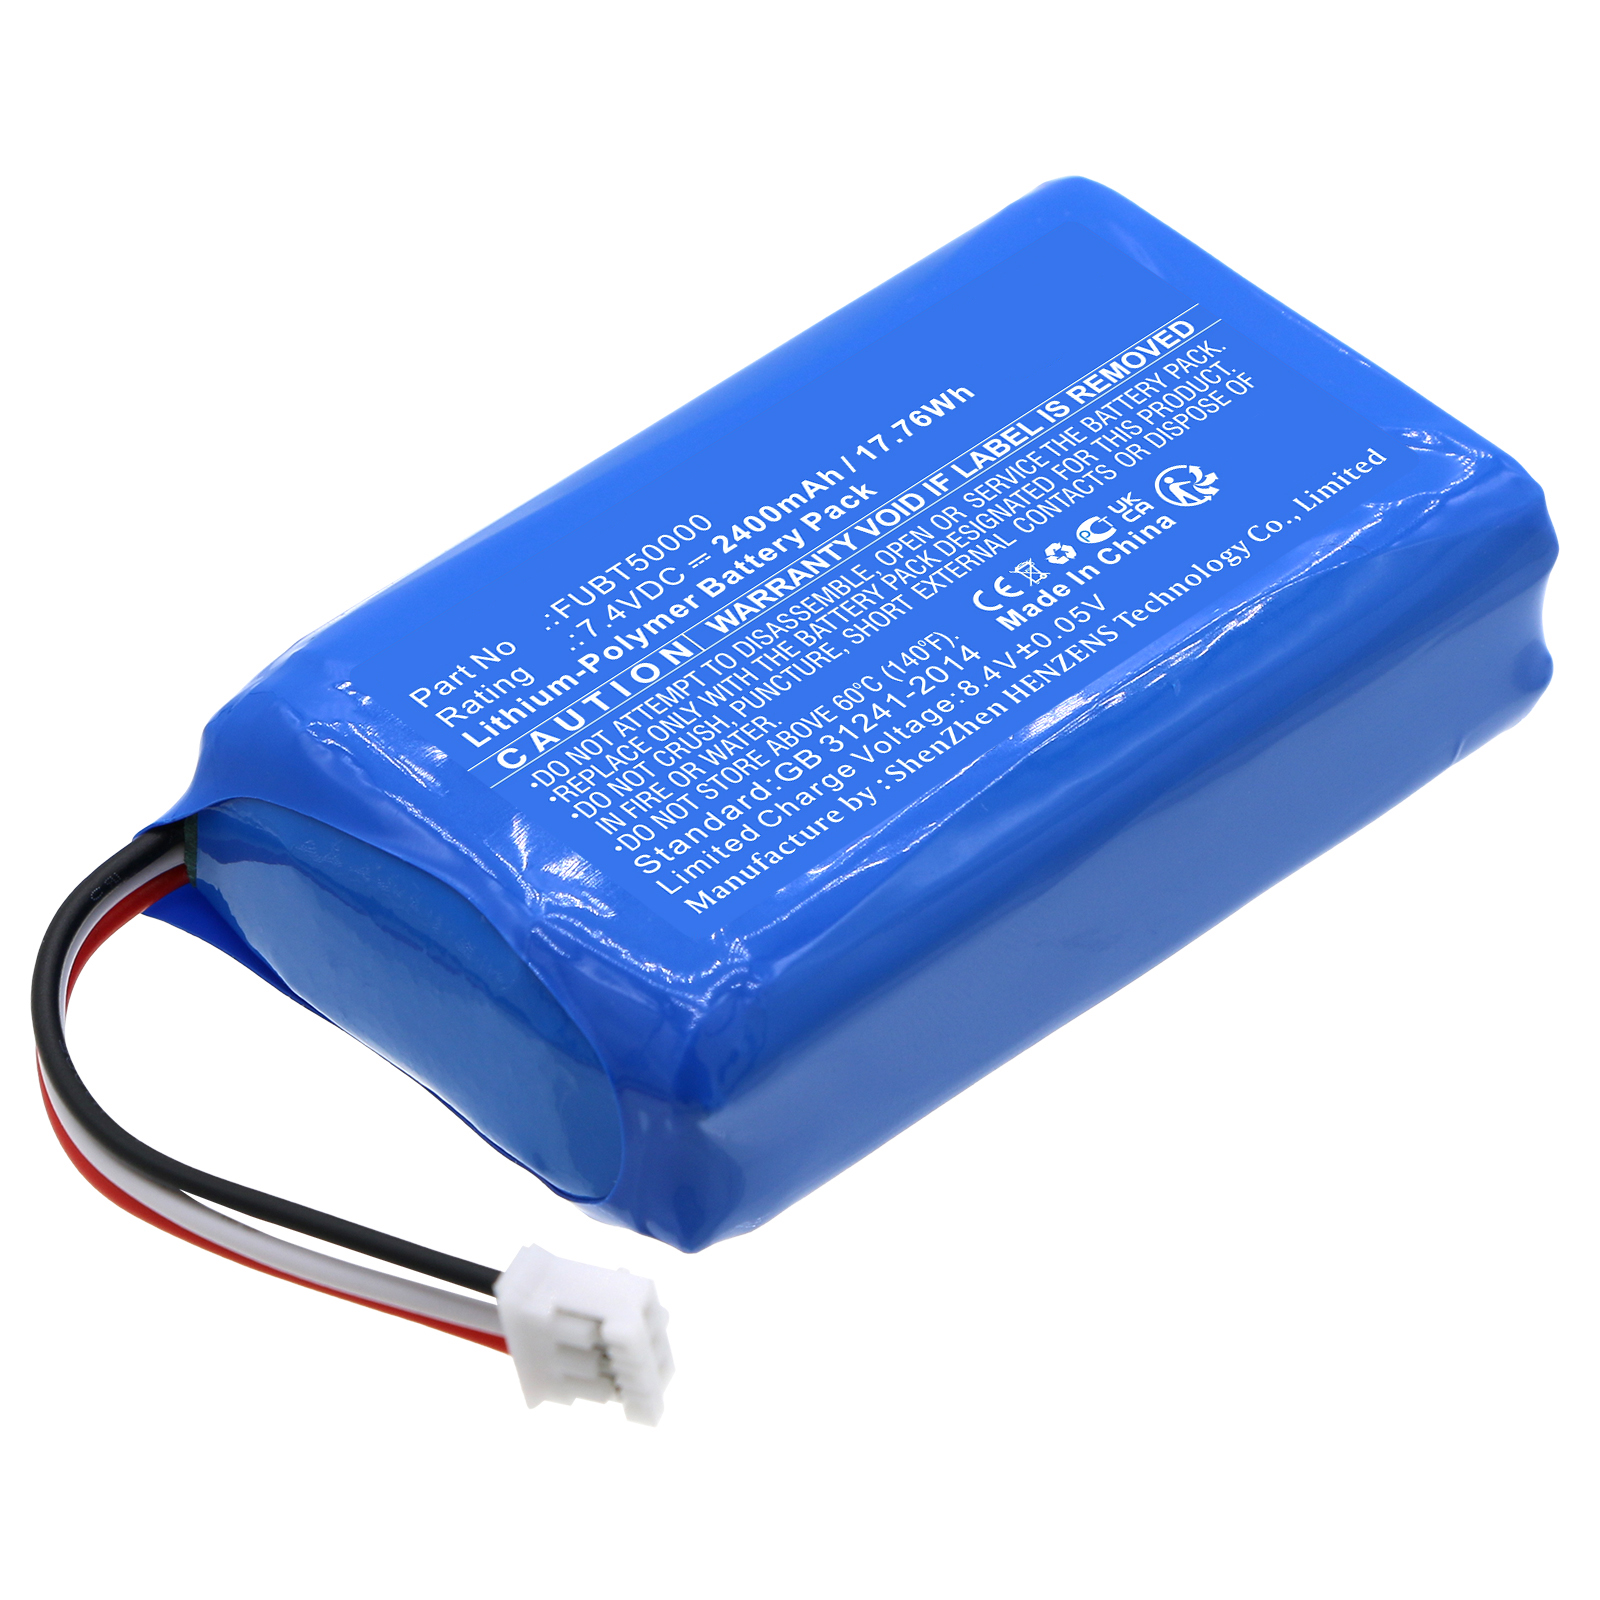 Batteries for ABUSAlarm System